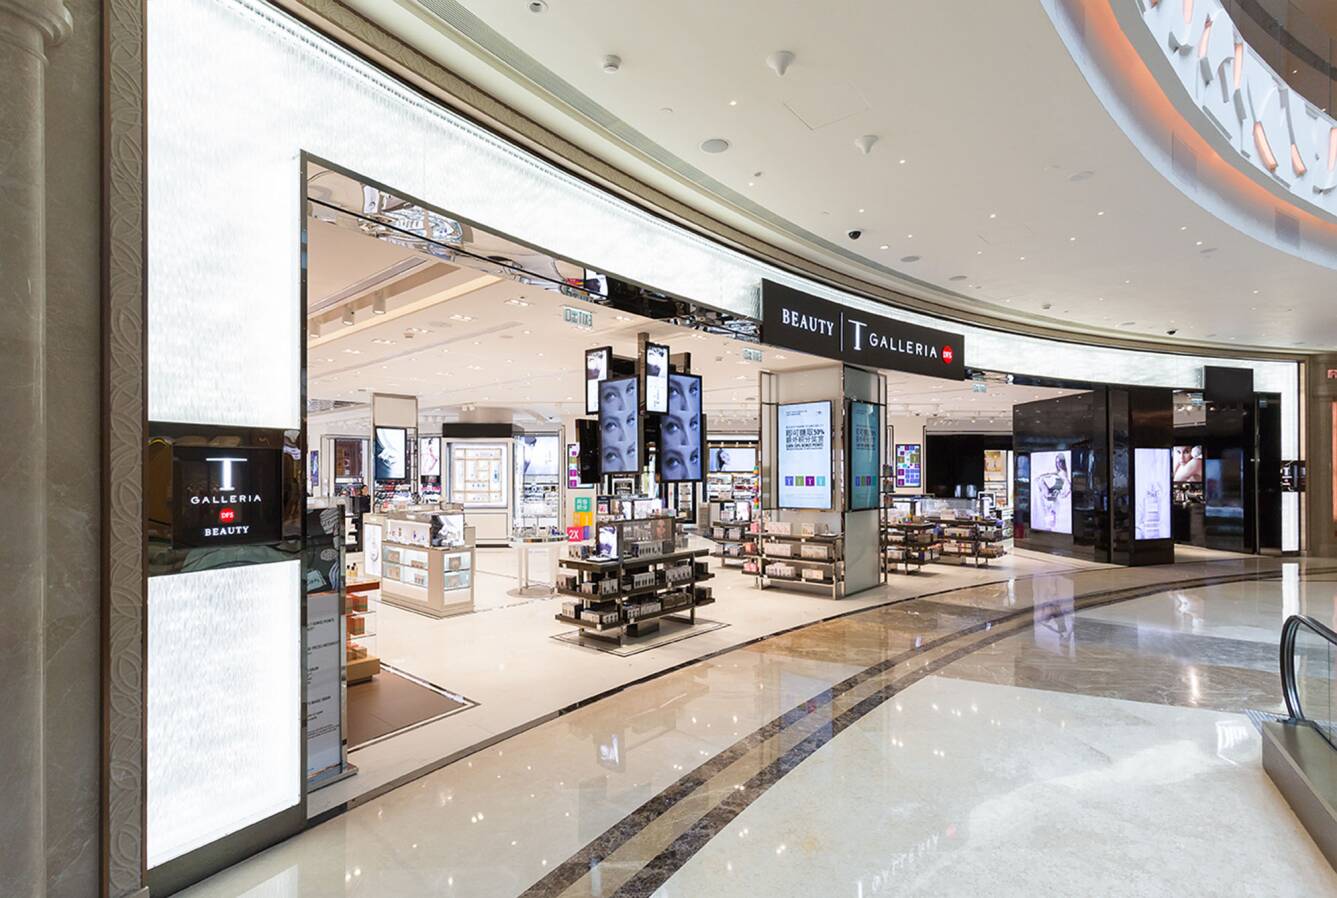 DFS navigates “difficult tourist environment” as LVMH grows - Retail in Asia